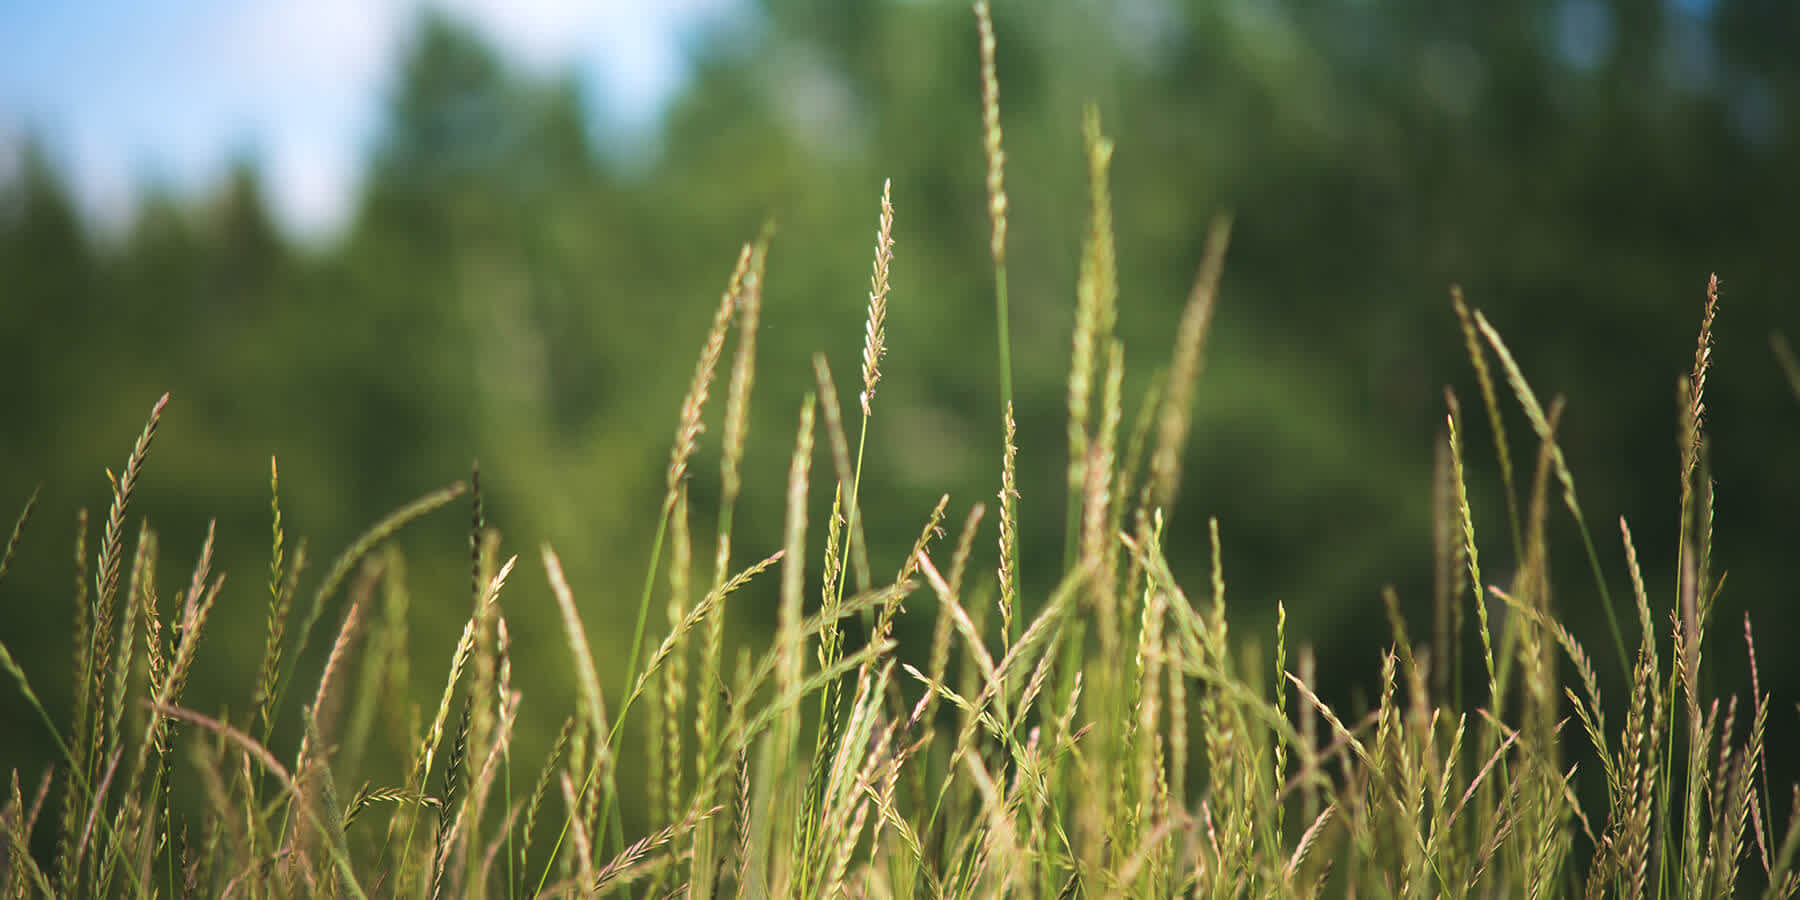 Field of grass that can produce grass allergy symptoms